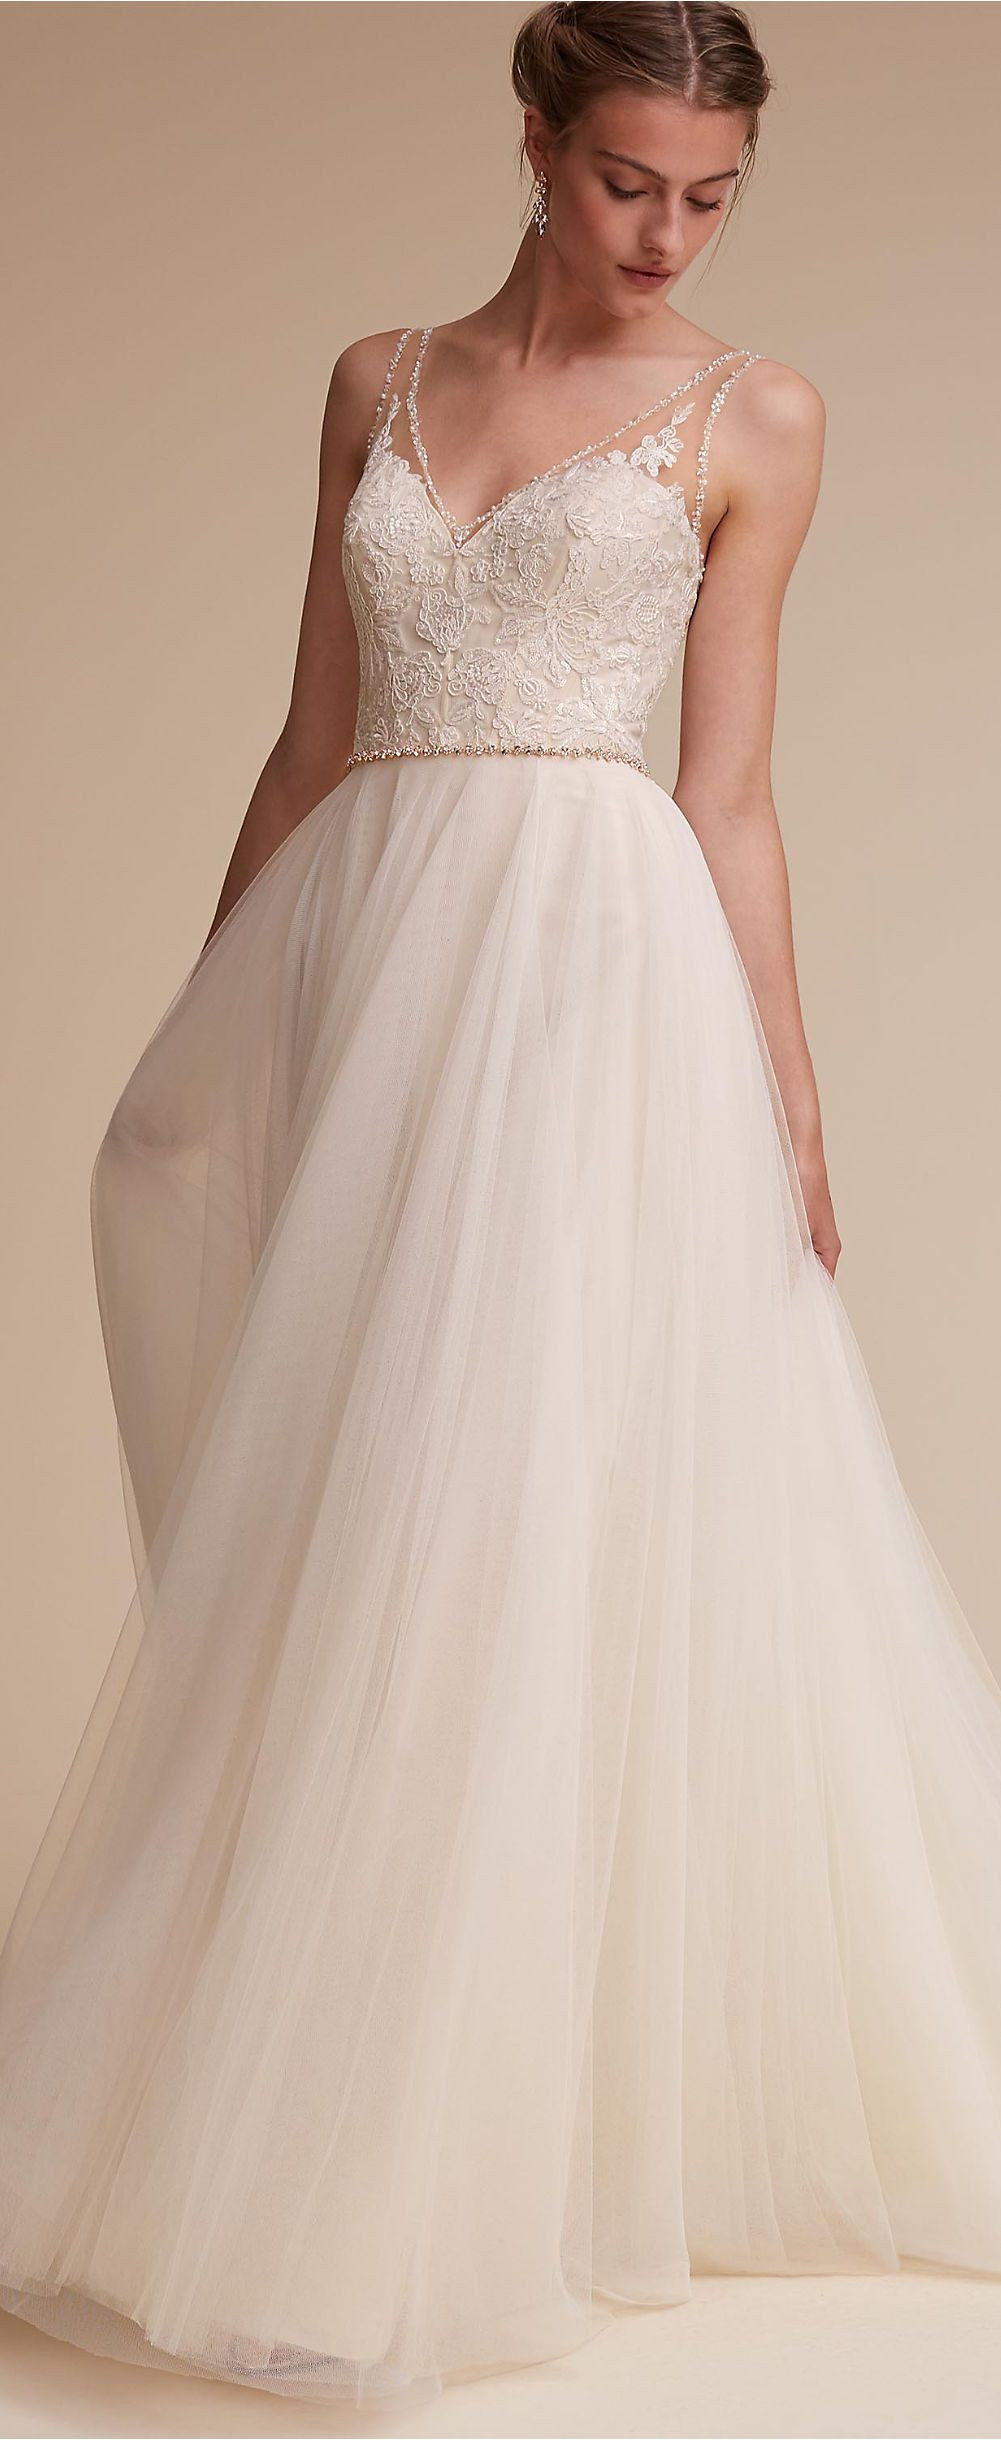 Ethereal Wedding Gowns
 Ethereal wedding dress by BHLDN